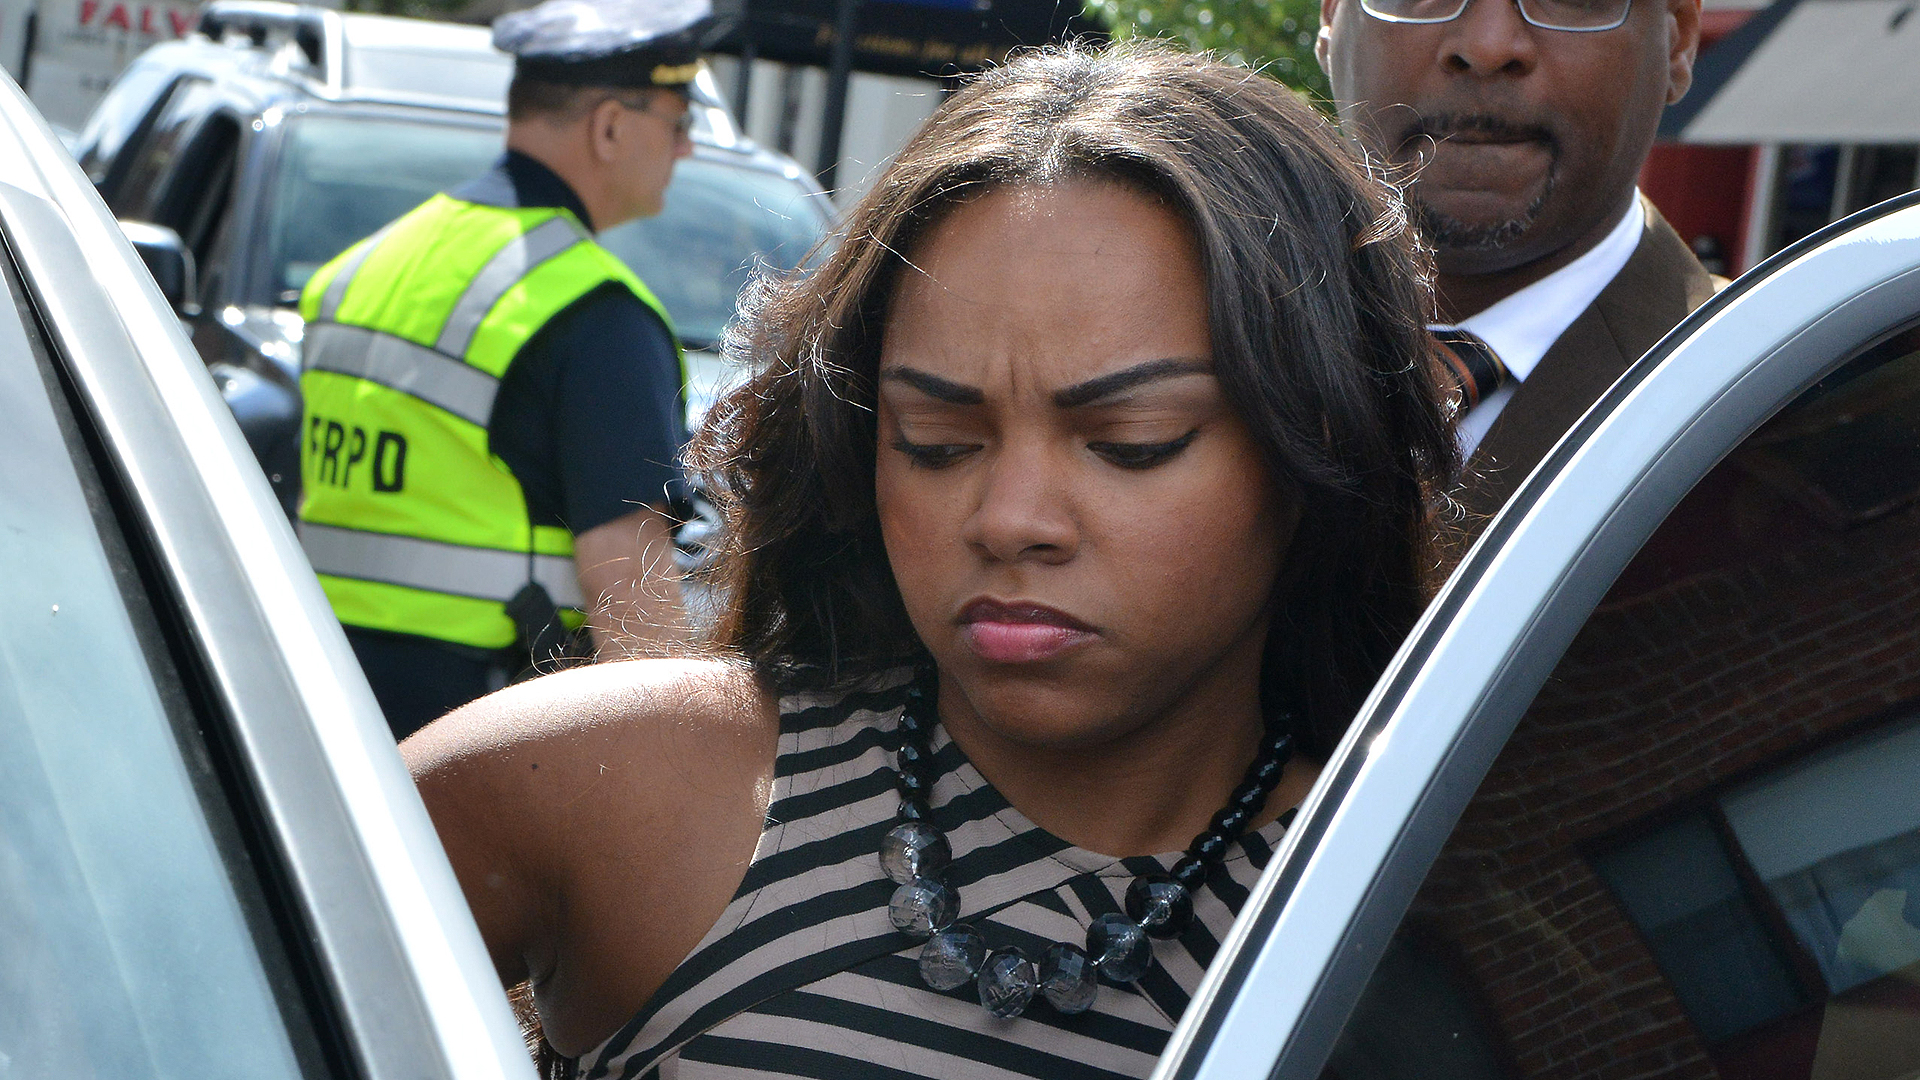 Aaron Hernandez's fiancee Shayanna Jenkins, two others indicted - ESPN